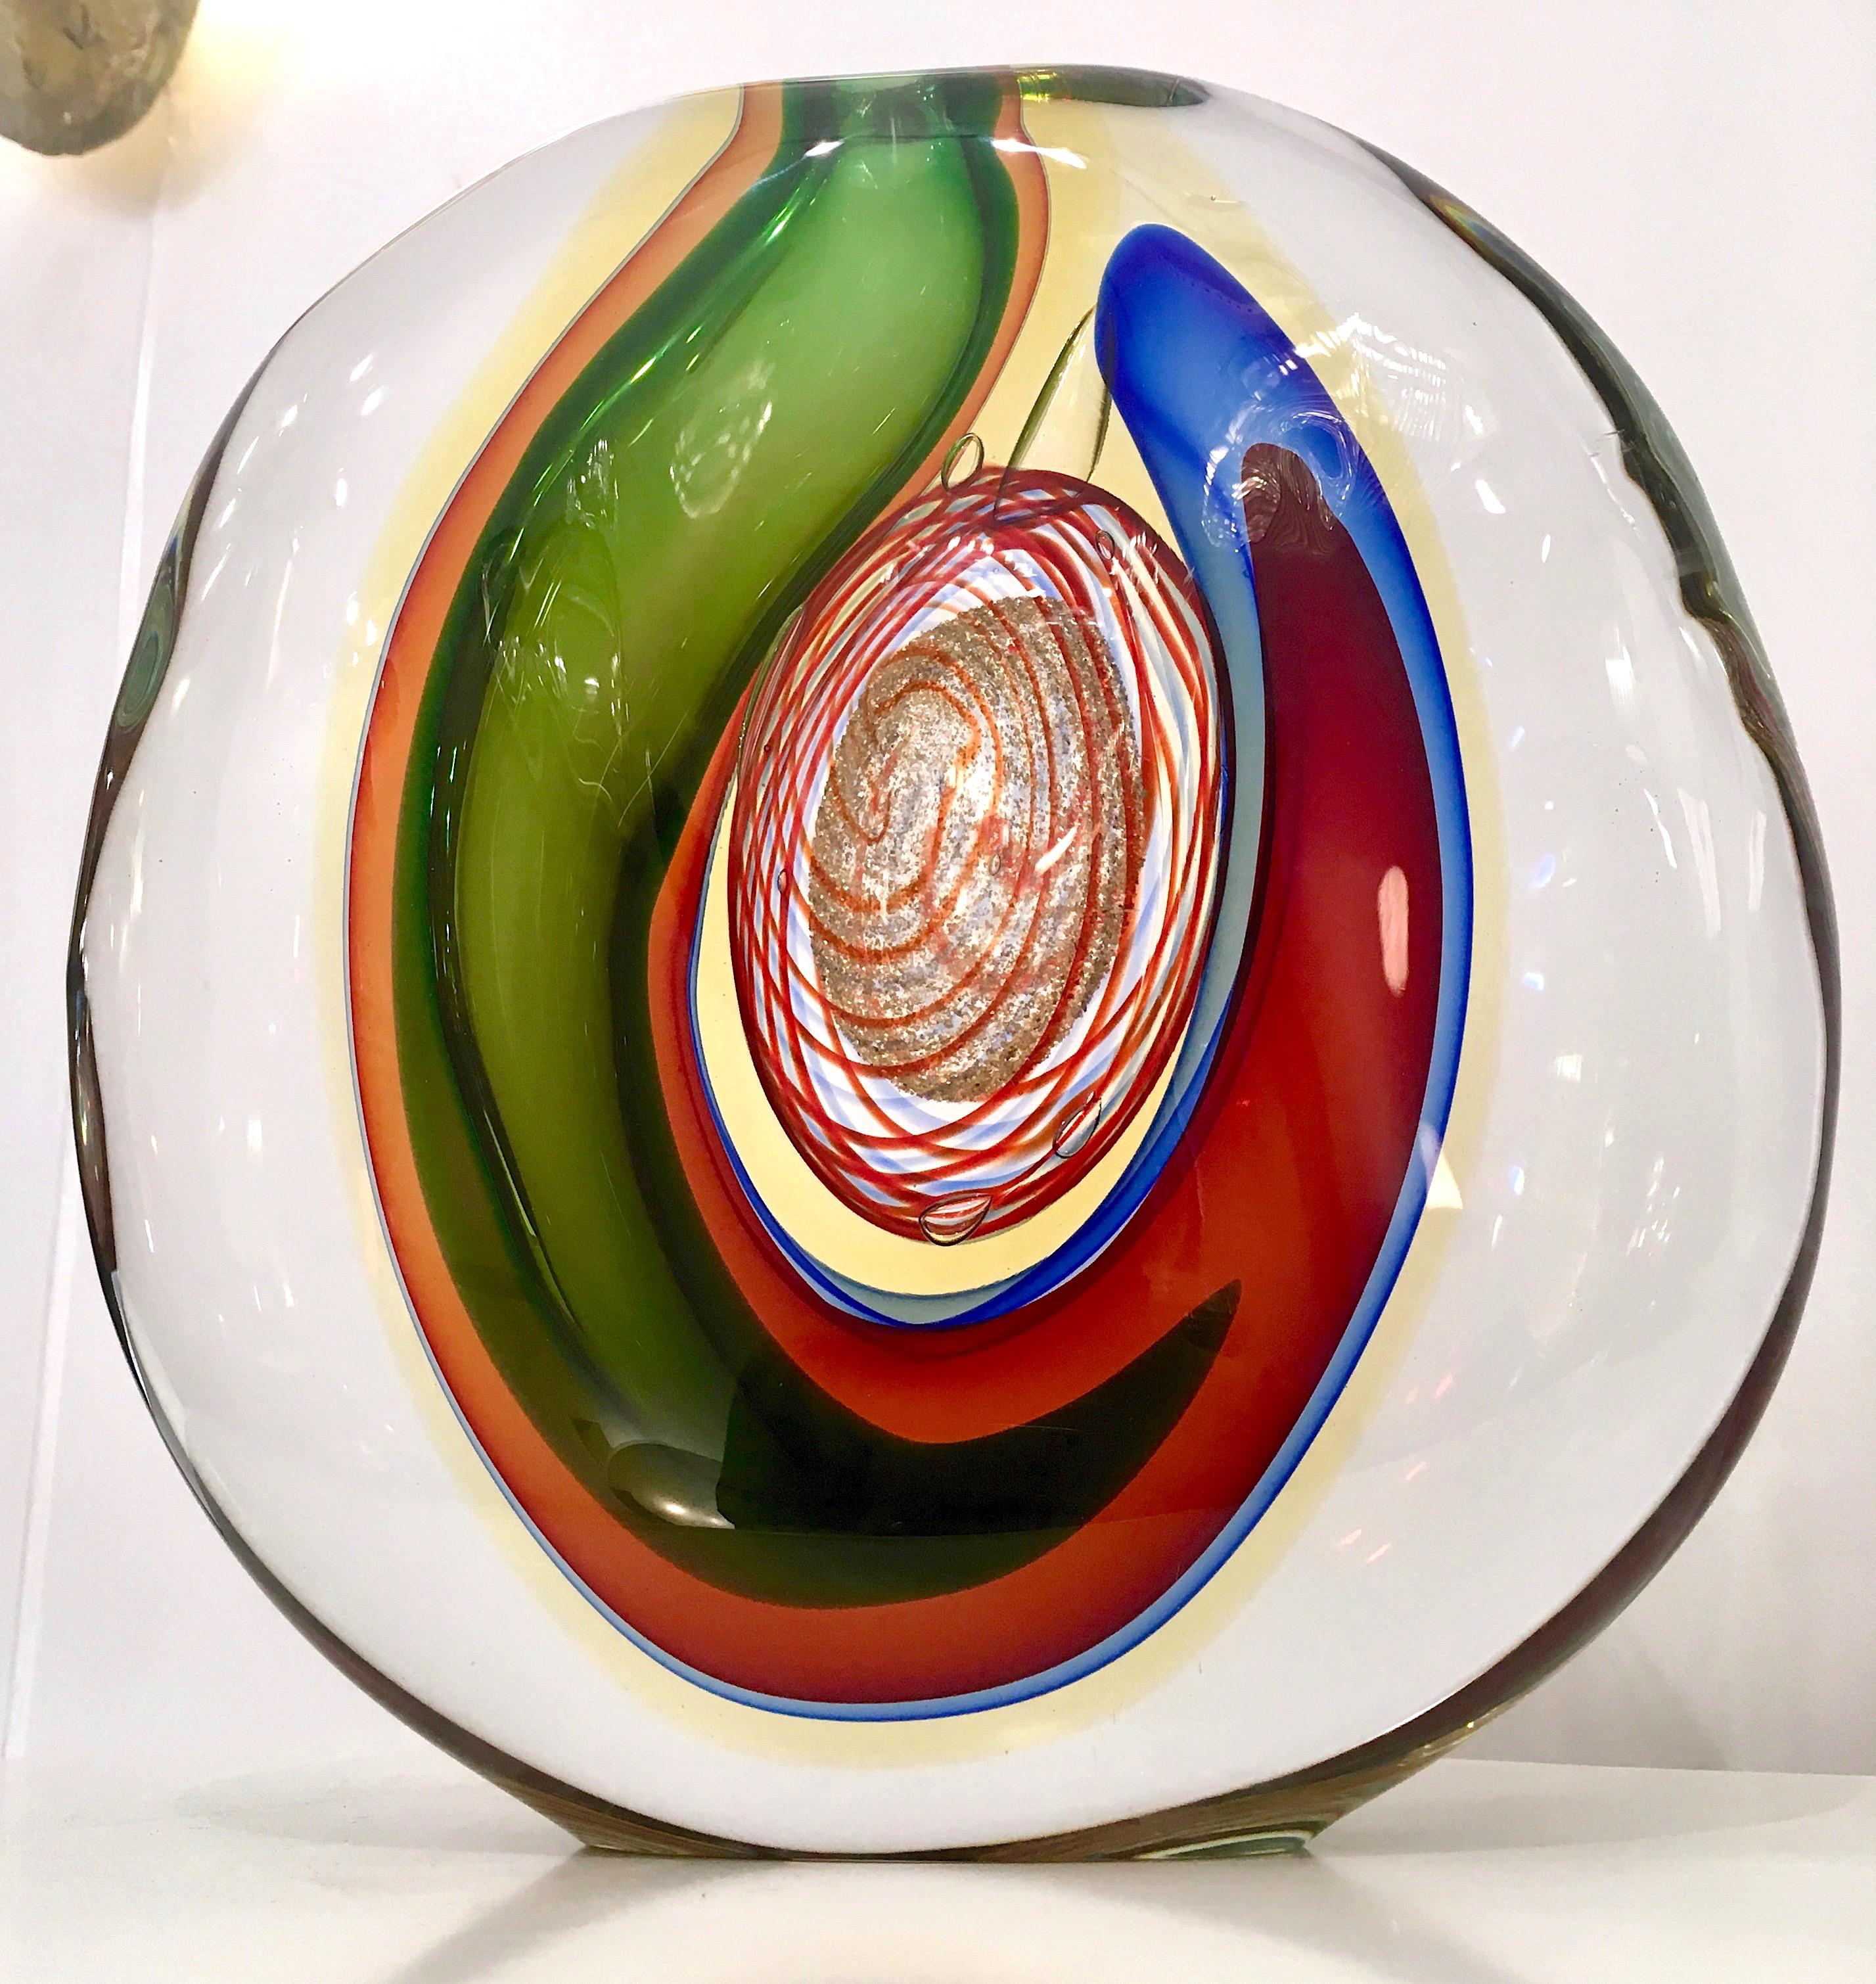 Sophisticated Italian work of Art by Alfredo Barbini, a sculptural vase of very organic stone shape, worked like an abstract painting, the crystal clear blown Murano glass encloses layers of Sommerso colors, blue, red, green, yellow and a precious